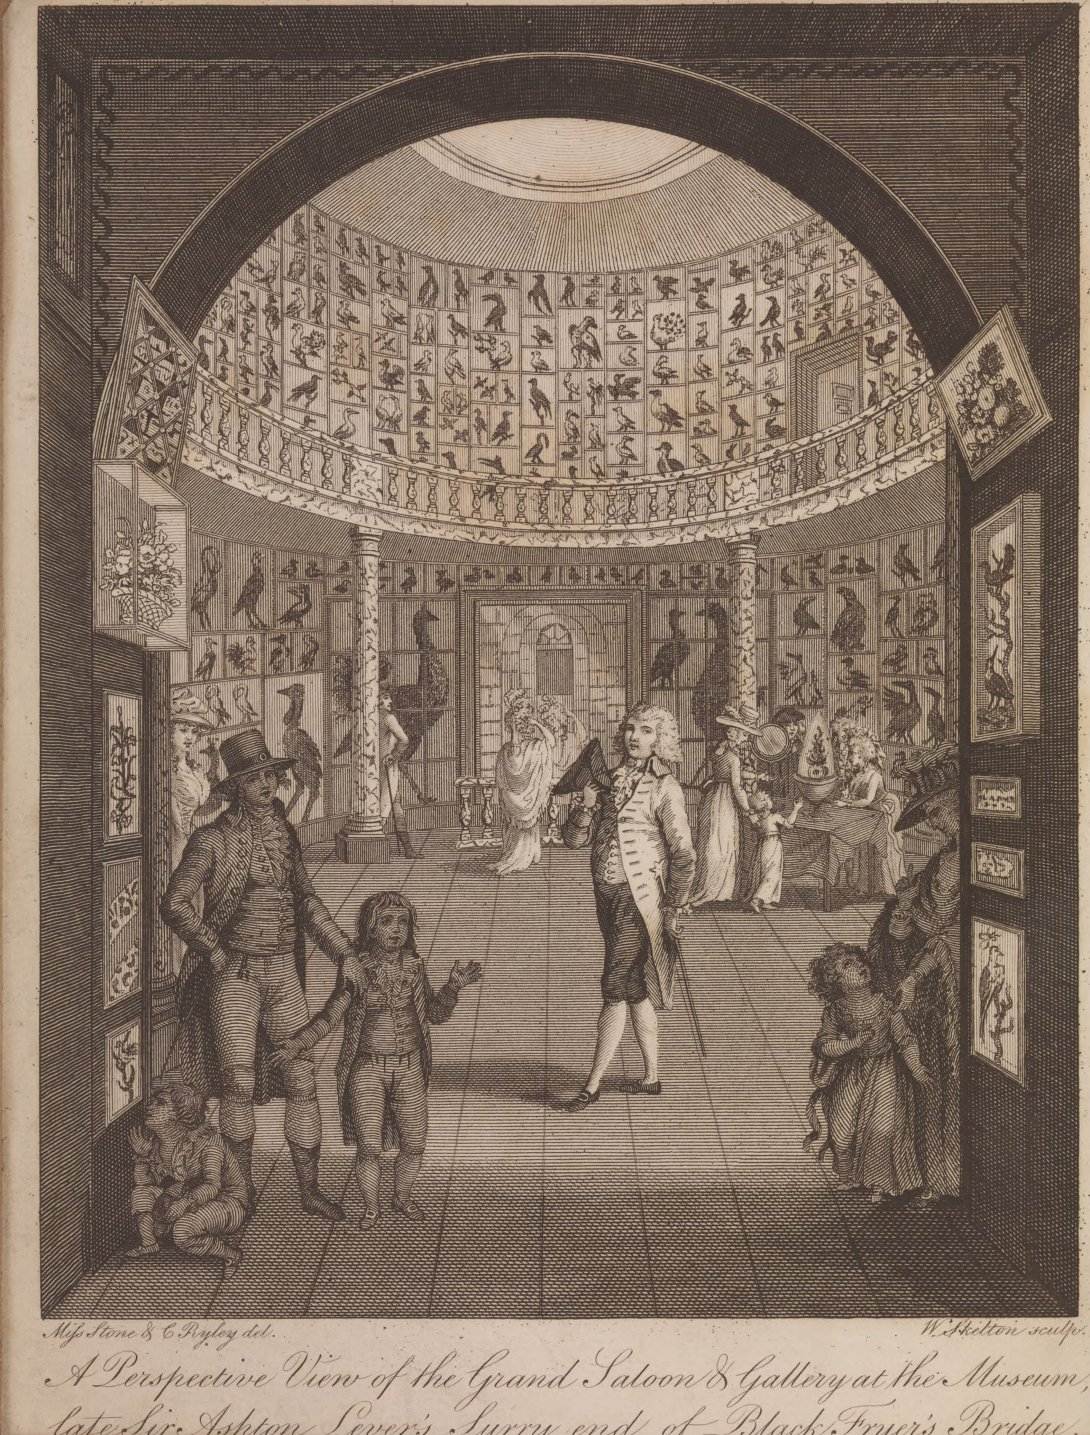 Frontispiece to A Companion to the museum, late Sir Ashton Lever's), London: 1790